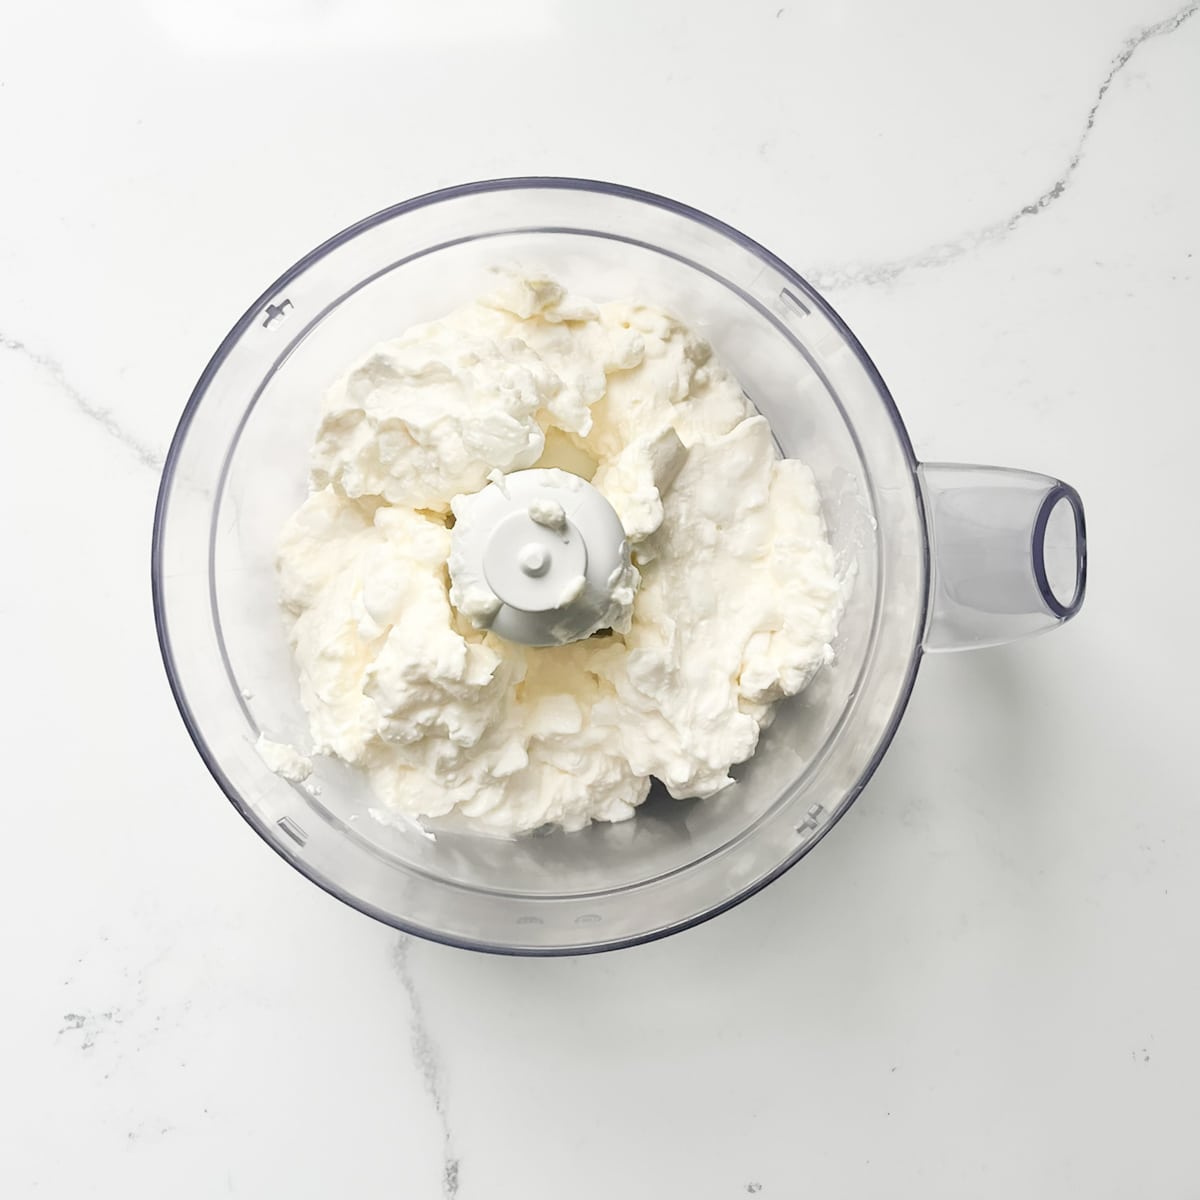 Crumbly cottage cheese in a food processor. 